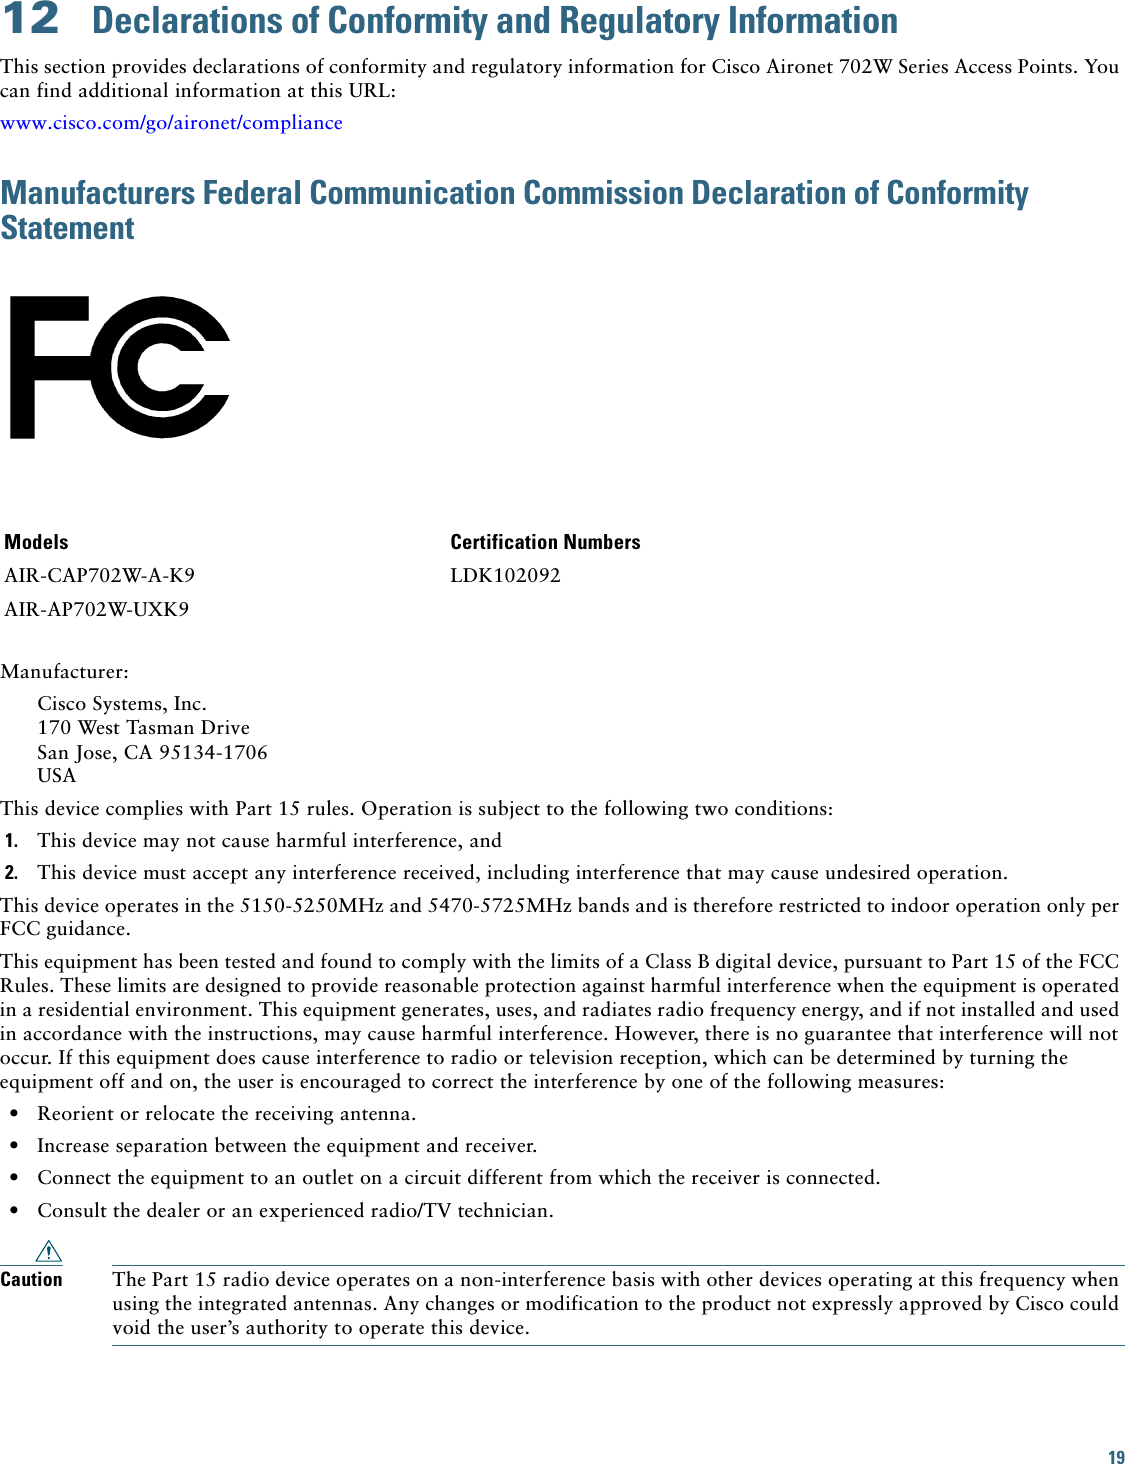 19 12  Declarations of Conformity and Regulatory InformationThis section provides declarations of conformity and regulatory information for Cisco Aironet 702W Series Access Points. You can find additional information at this URL:www.cisco.com/go/aironet/complianceManufacturers Federal Communication Commission Declaration of Conformity StatementManufacturer:Cisco Systems, Inc.170 West Tasman DriveSan Jose, CA 95134-1706USAThis device complies with Part 15 rules. Operation is subject to the following two conditions:1. This device may not cause harmful interference, and2. This device must accept any interference received, including interference that may cause undesired operation.This device operates in the 5150-5250MHz and 5470-5725MHz bands and is therefore restricted to indoor operation only per FCC guidance. This equipment has been tested and found to comply with the limits of a Class B digital device, pursuant to Part 15 of the FCC Rules. These limits are designed to provide reasonable protection against harmful interference when the equipment is operated in a residential environment. This equipment generates, uses, and radiates radio frequency energy, and if not installed and used in accordance with the instructions, may cause harmful interference. However, there is no guarantee that interference will not occur. If this equipment does cause interference to radio or television reception, which can be determined by turning the equipment off and on, the user is encouraged to correct the interference by one of the following measures:•Reorient or relocate the receiving antenna.•Increase separation between the equipment and receiver.•Connect the equipment to an outlet on a circuit different from which the receiver is connected.•Consult the dealer or an experienced radio/TV technician.Caution The Part 15 radio device operates on a non-interference basis with other devices operating at this frequency when using the integrated antennas. Any changes or modification to the product not expressly approved by Cisco could void the user’s authority to operate this device.Models Certification NumbersAIR-CAP702W-A-K9 LDK102092AIR-AP702W-UXK9